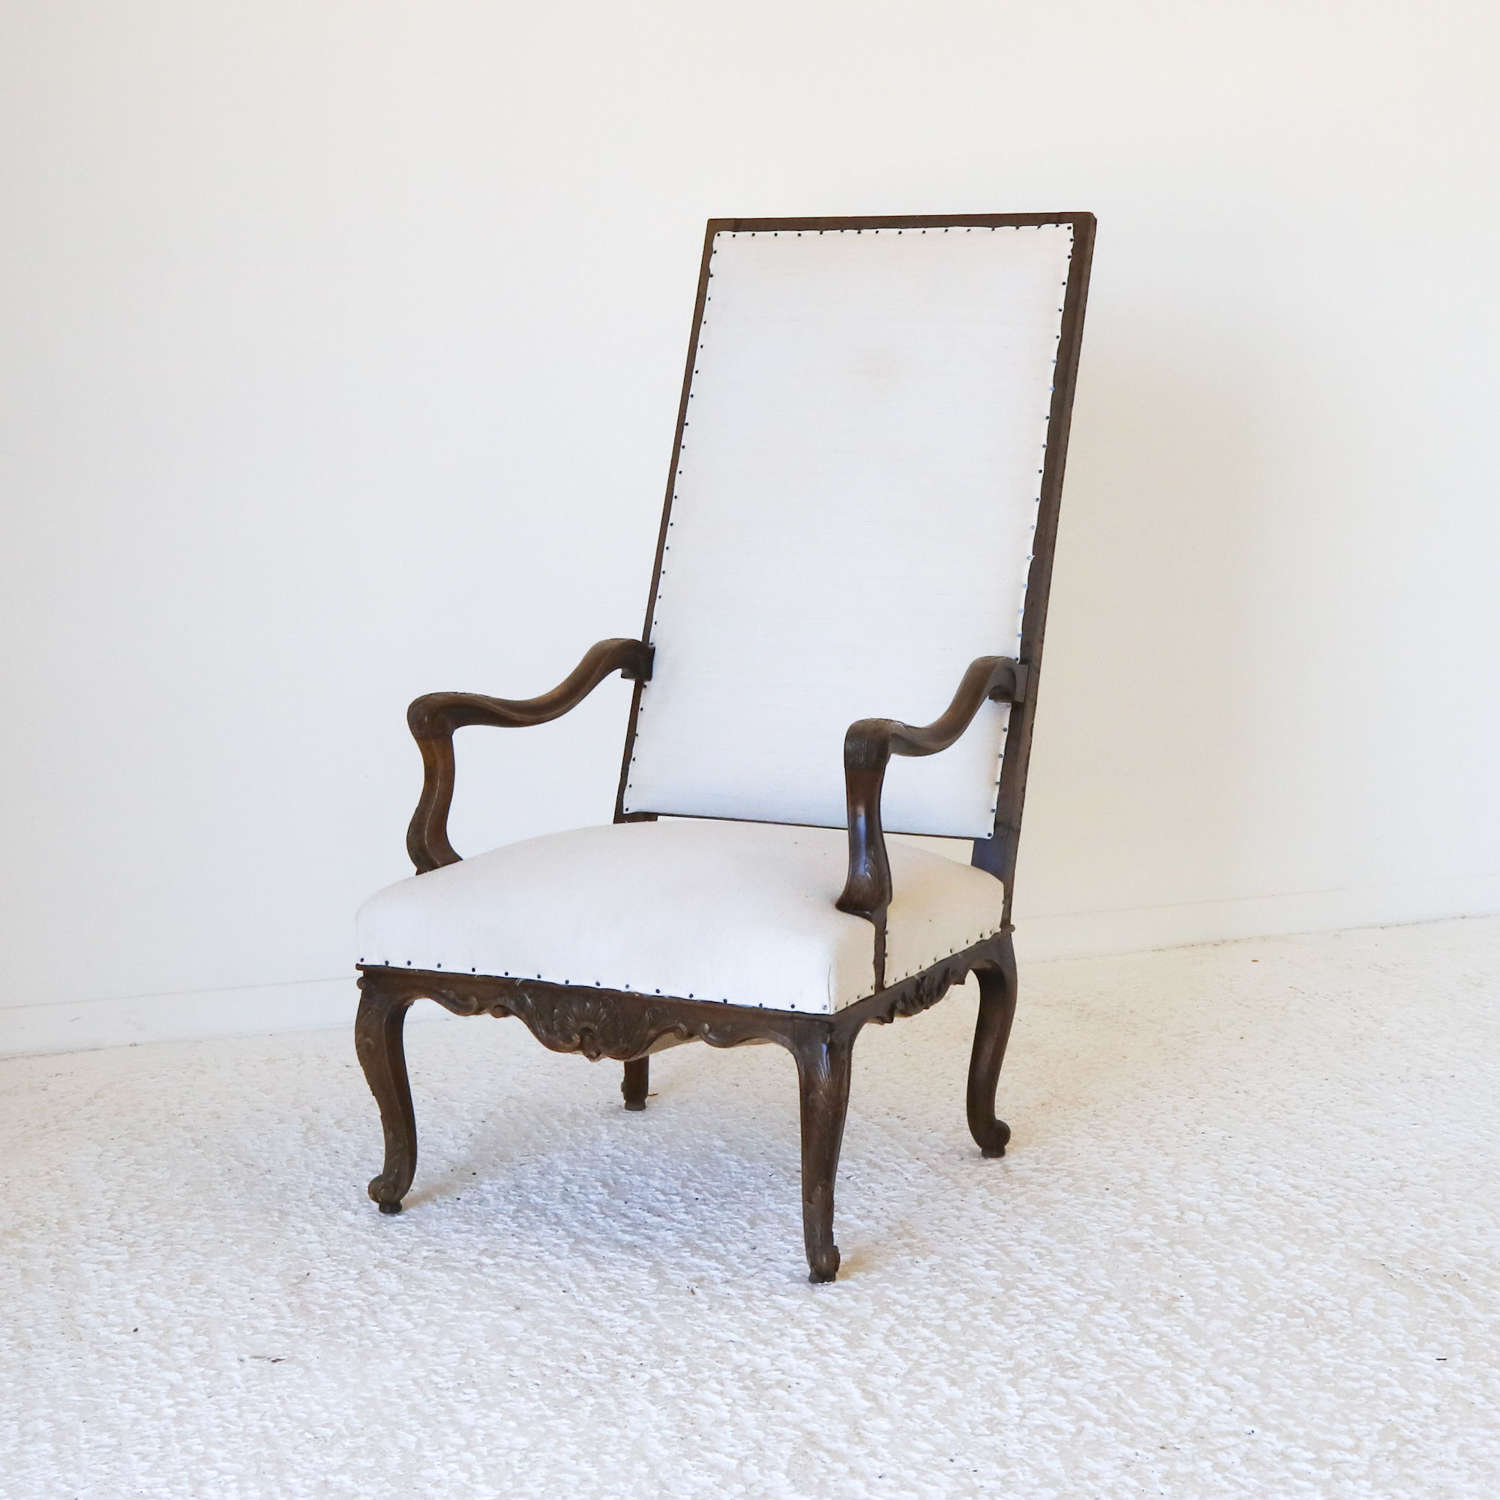 French High Back Chair in the manner of early 18th Century